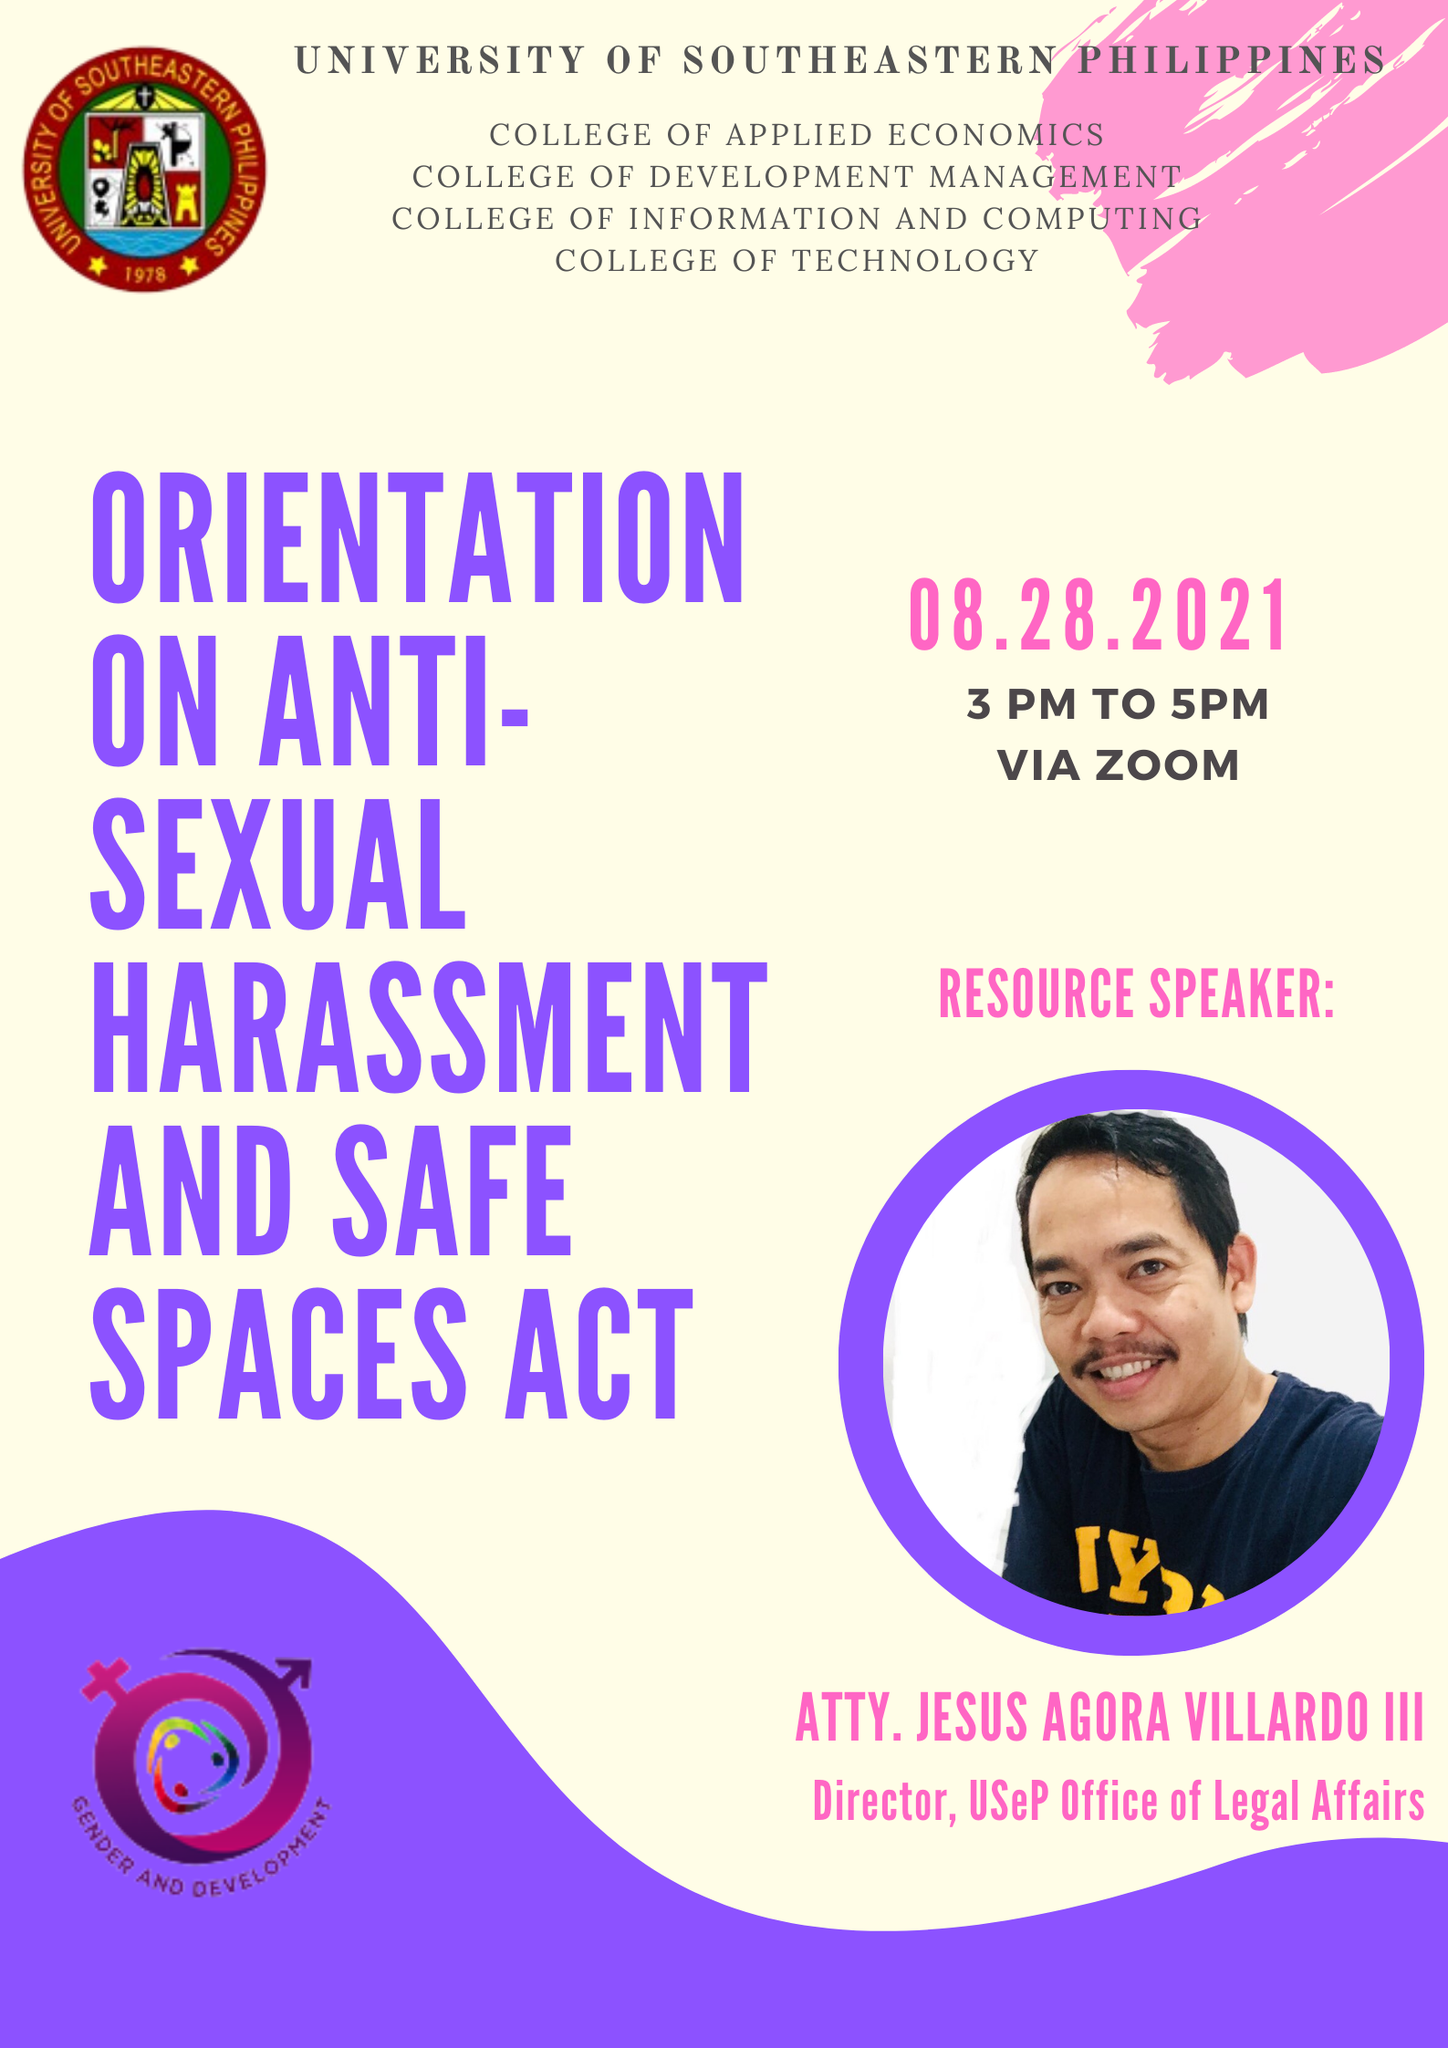 CIC Conducts Orientation on Anti-Sexual Harassment and Safe Spaces Act